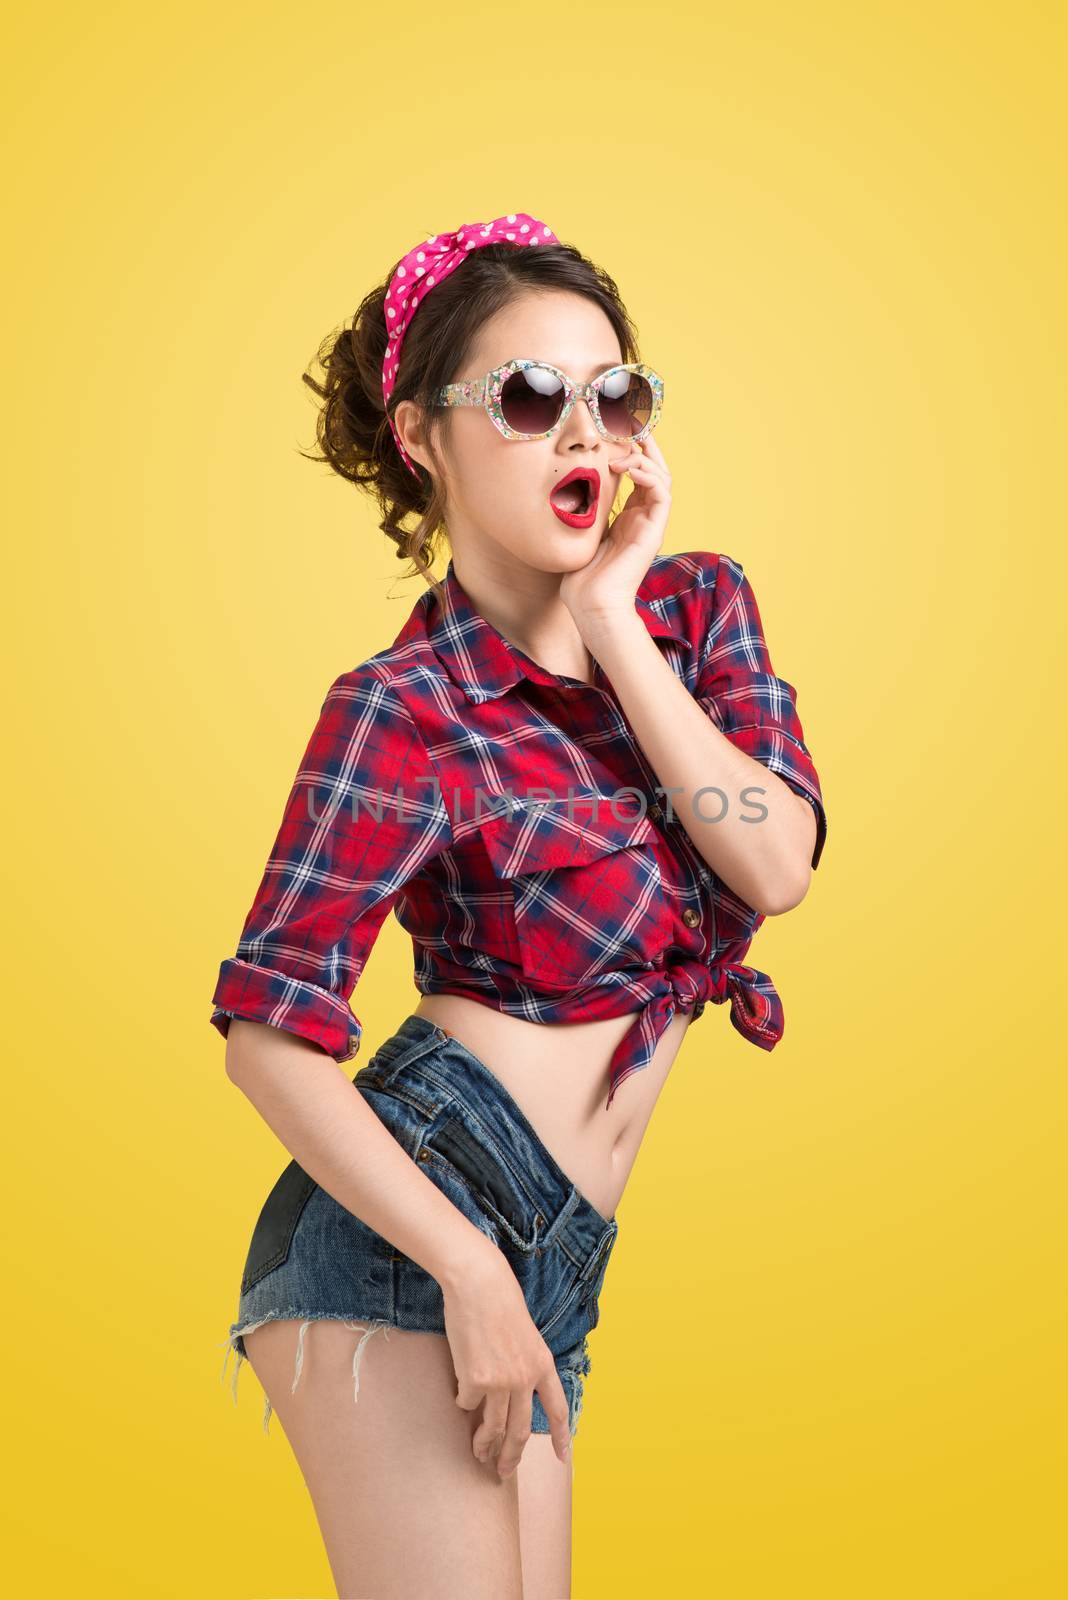 Lovely woman retro portrait with pin-up make-up and hairstyle wearing sunglasses posing over yellow background.